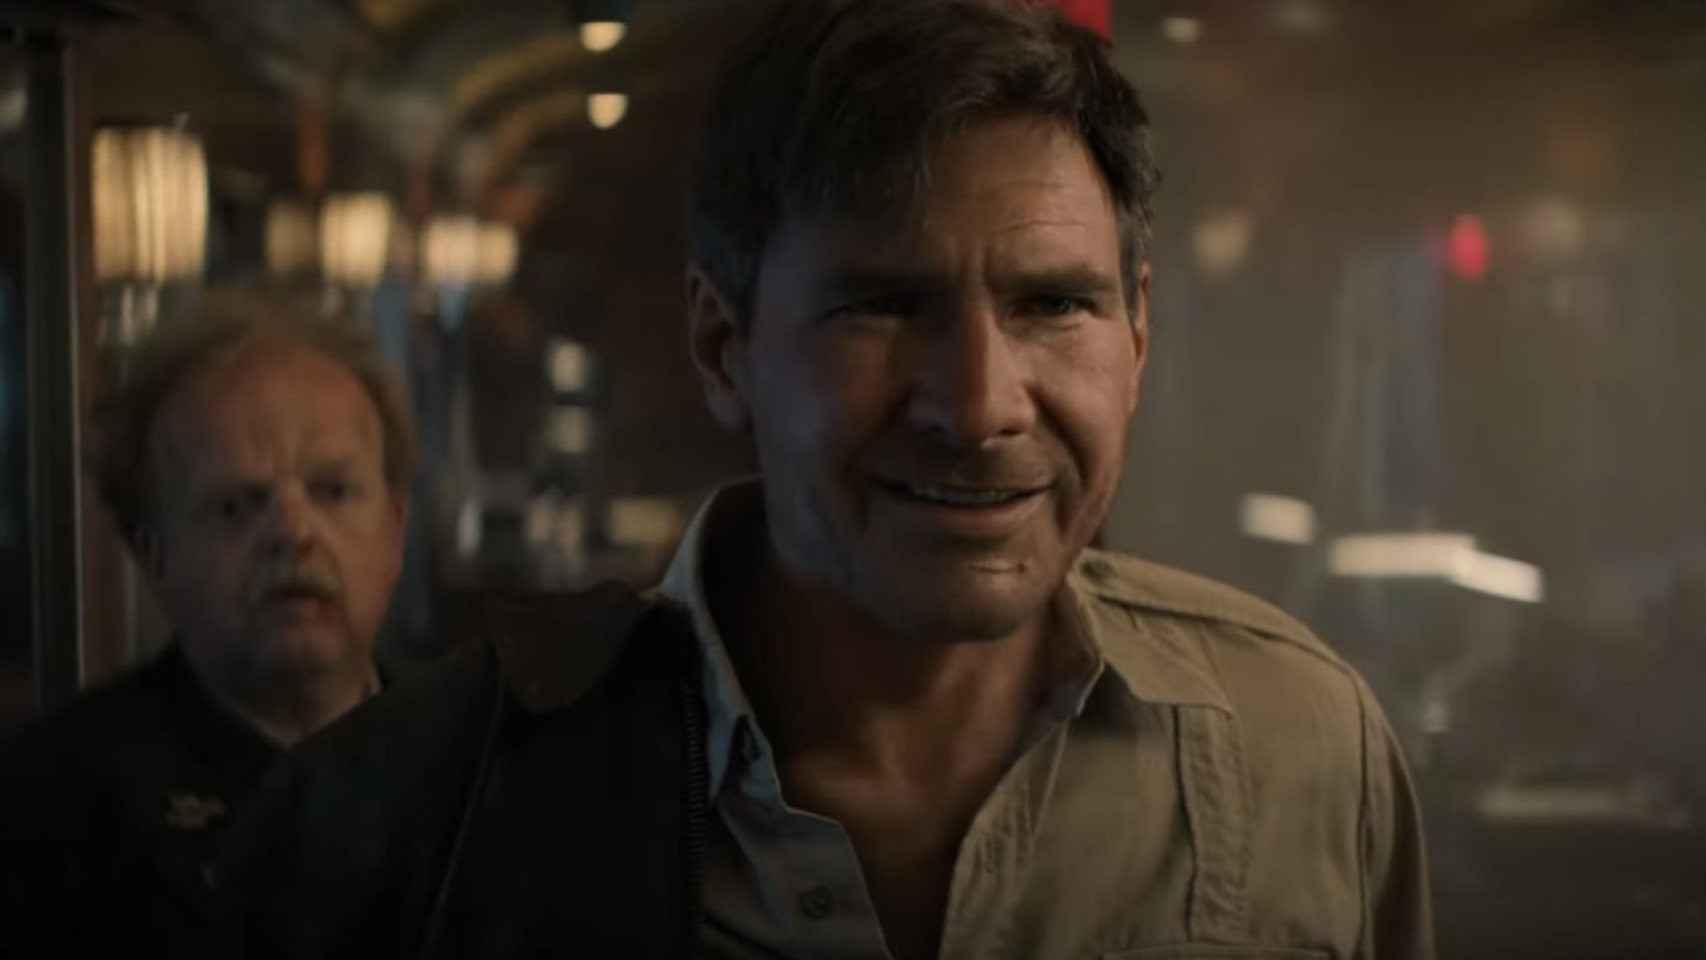 AI was able to create a young version of Harrison Ford